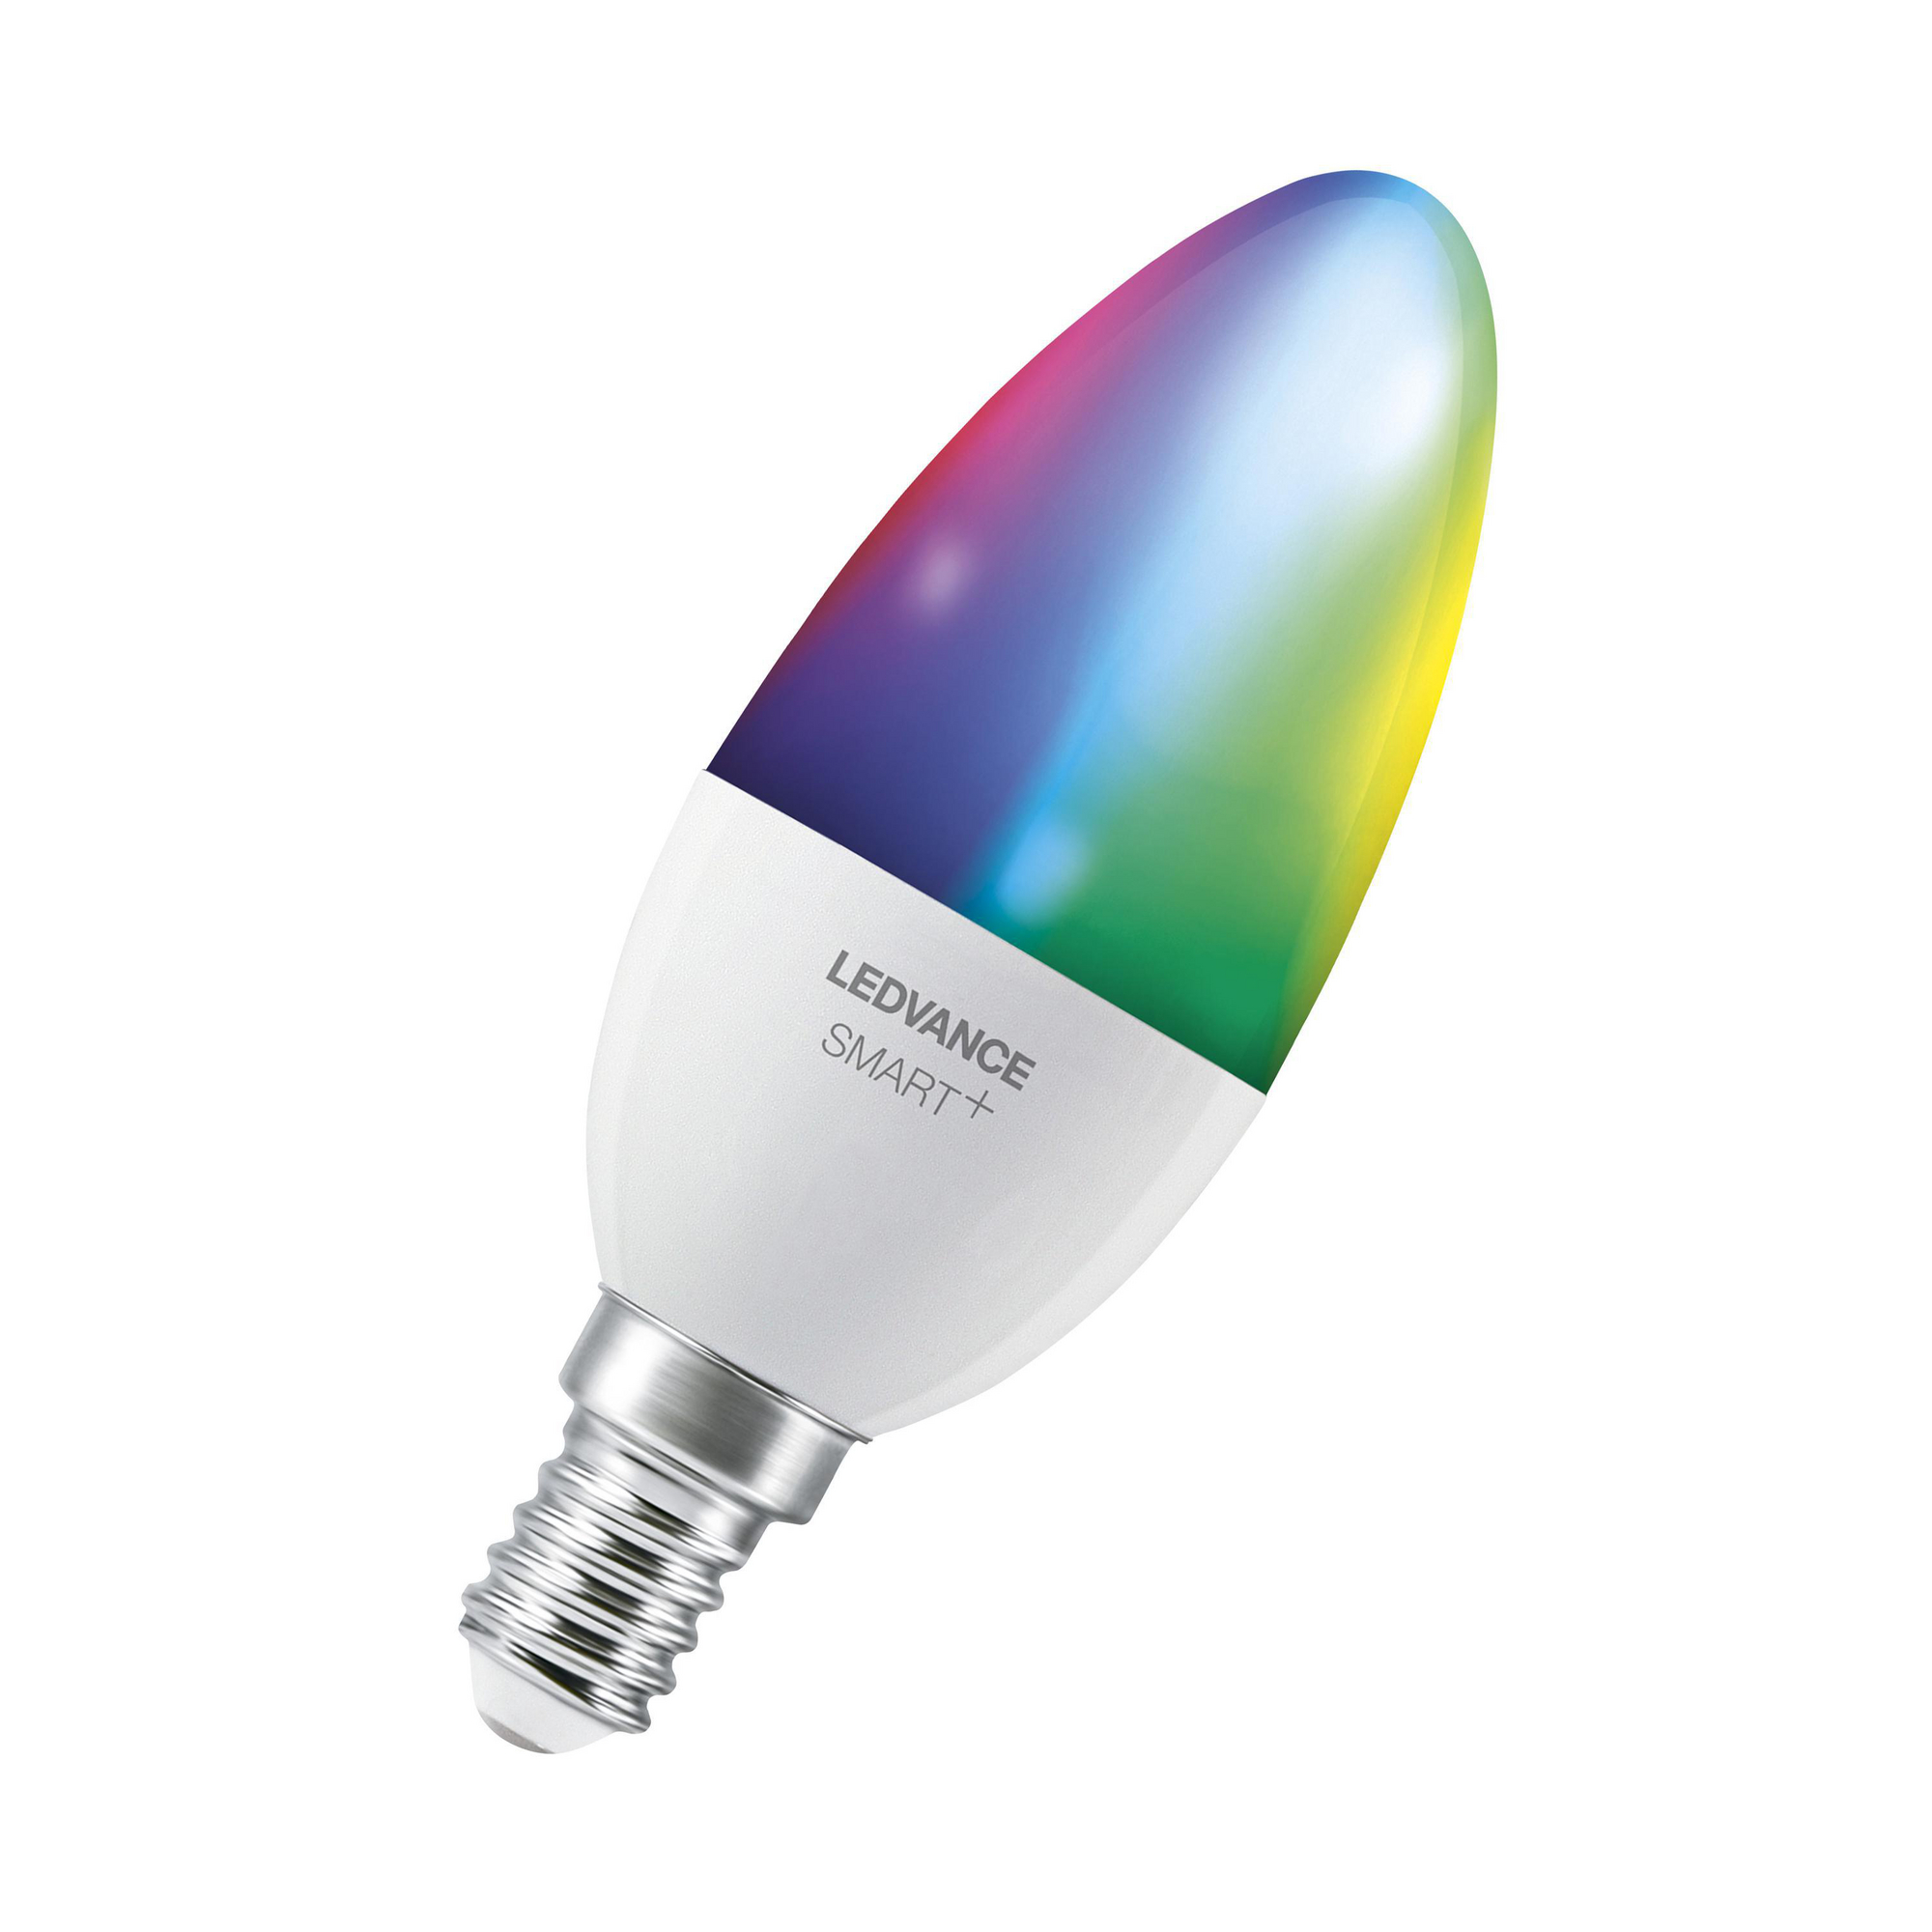 LED-Lampe 'Smart+' 10,7 cm 470 lm 5 W E14 weiß WLAN Tunable White + product picture